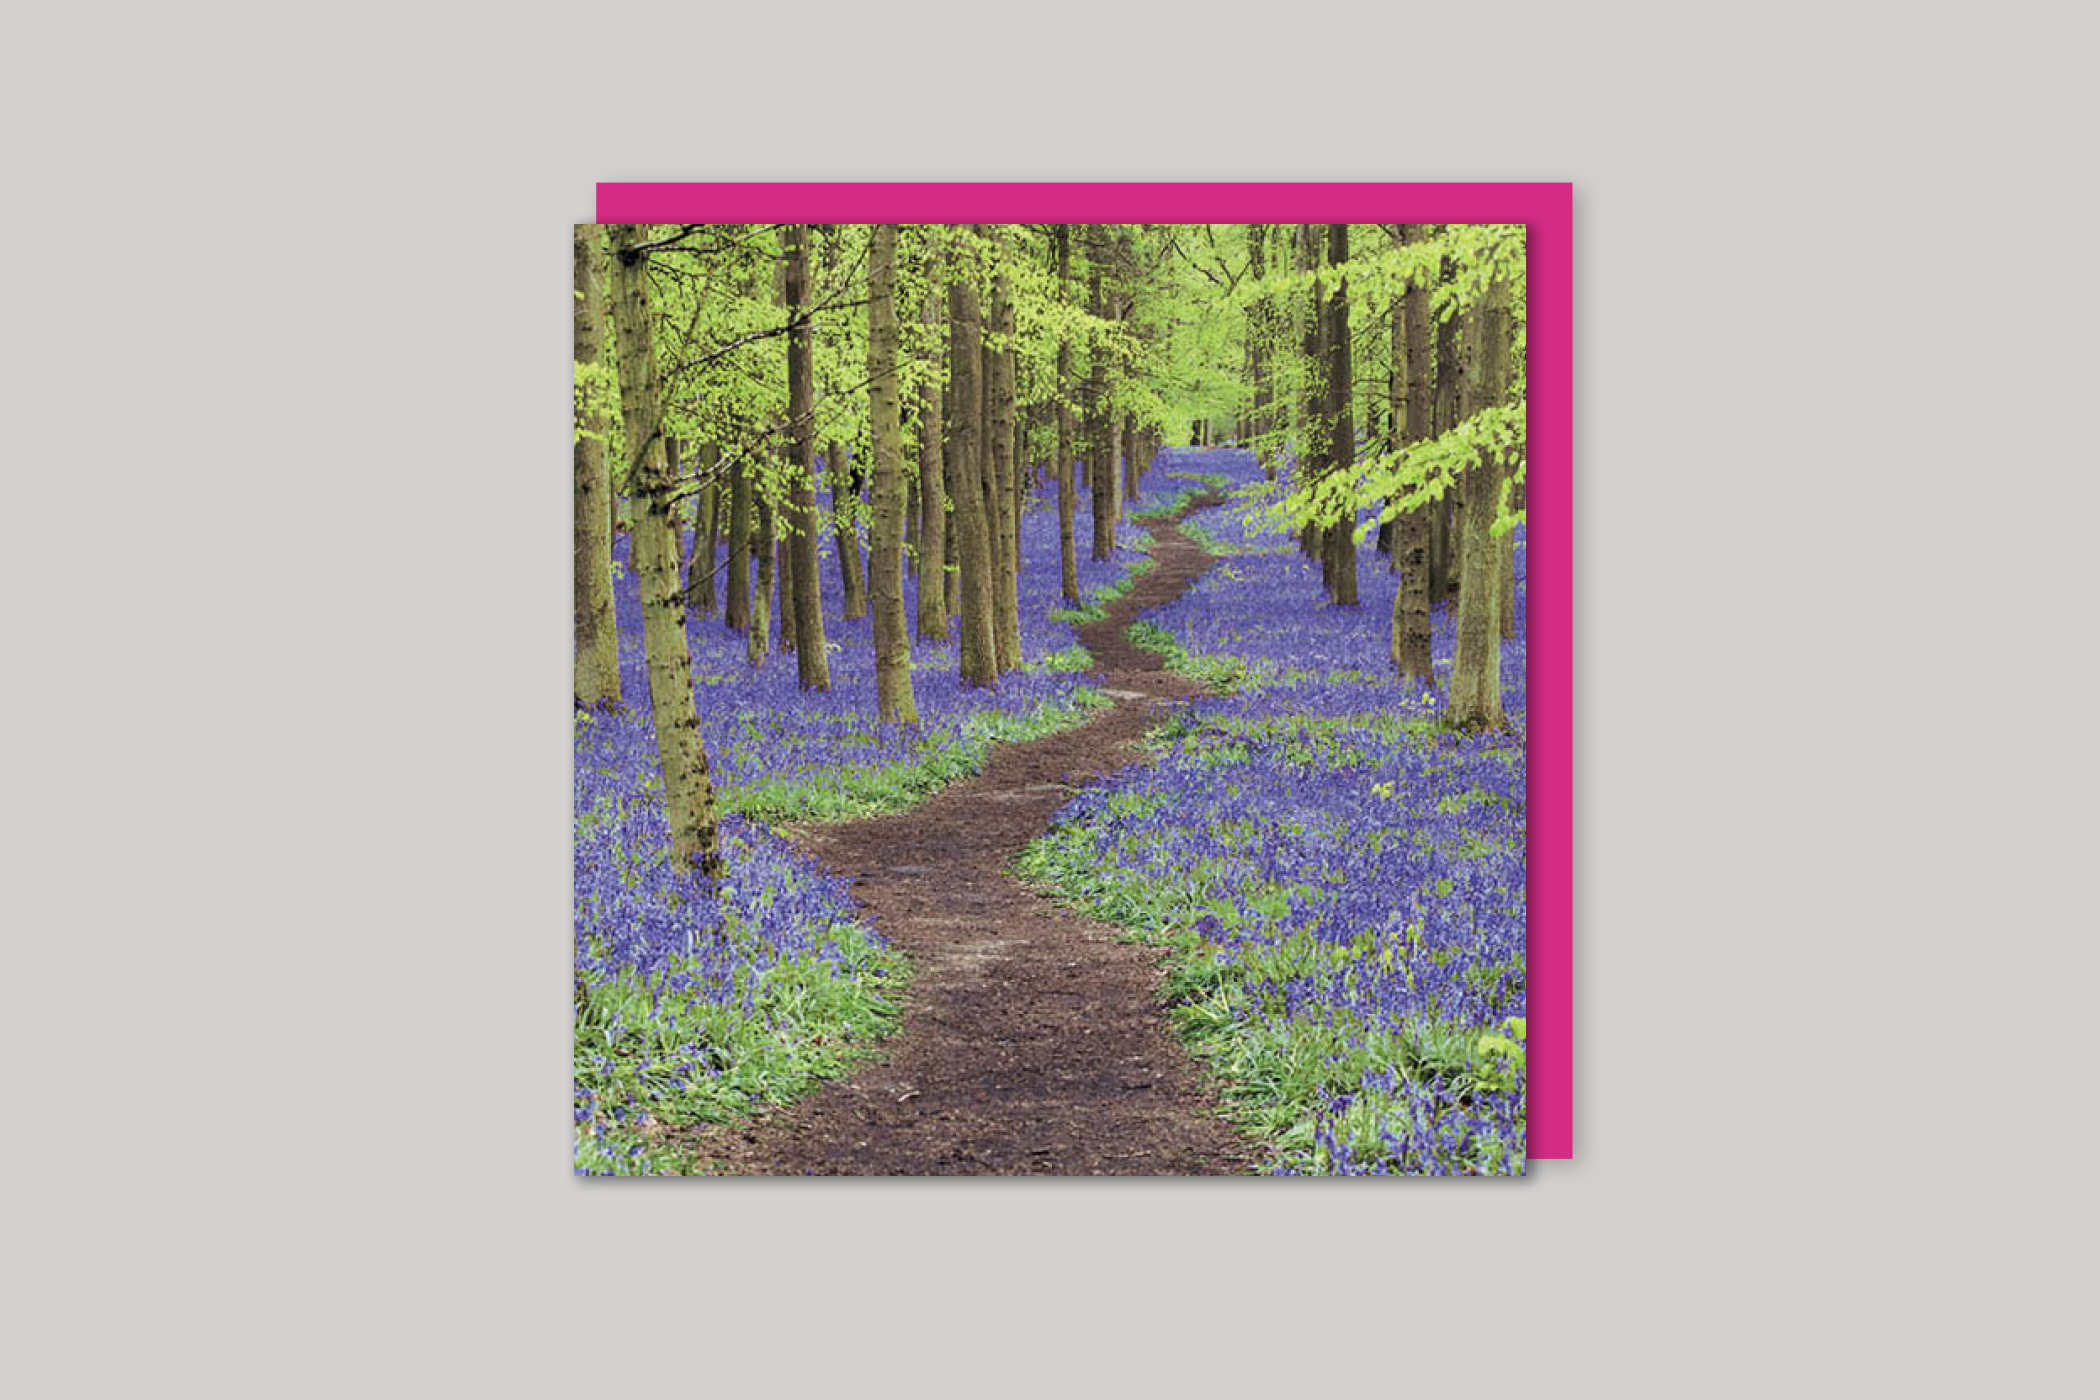 The Bluebell Wood from Exposure range of photographic cards by Icon, back page.